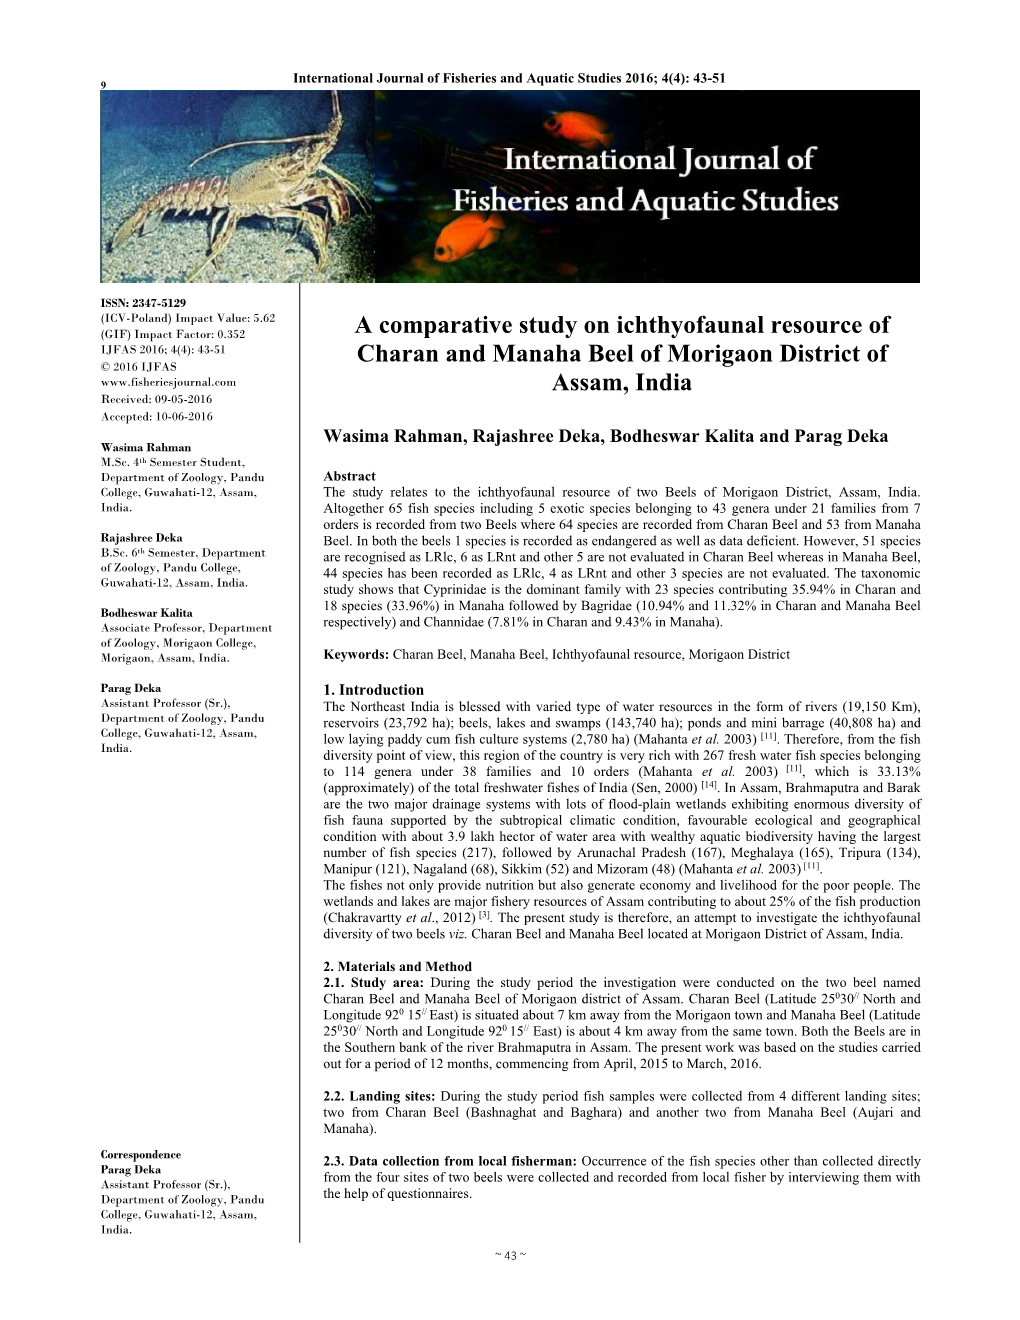 A Comparative Study on Ichthyofaunal Resource of Charan and Manaha Beel of Morigaon District of Assam, India